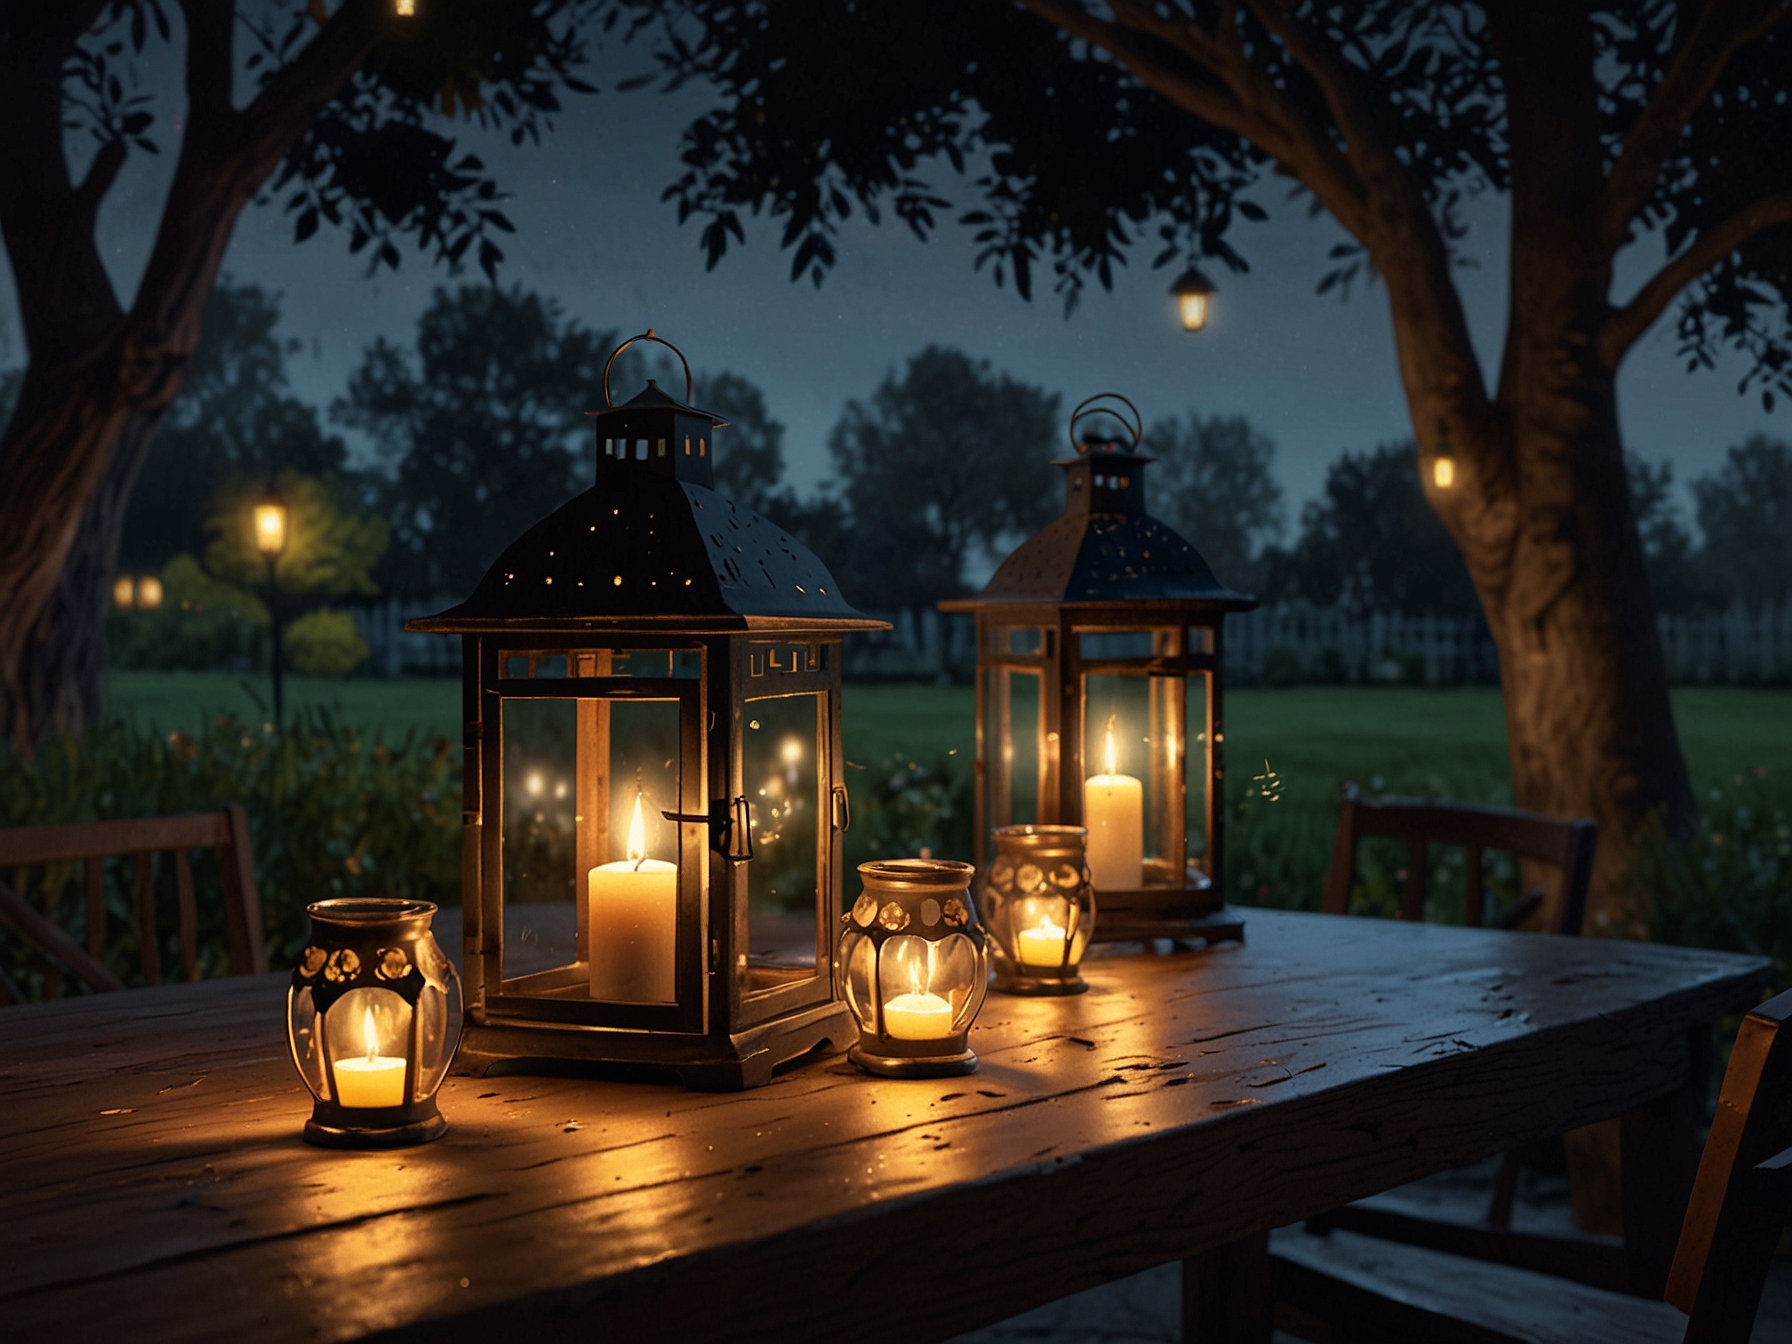 Several intricately designed garden lanterns adorning an outdoor table, creating a charming and cozy setting for an evening dinner party in the garden.